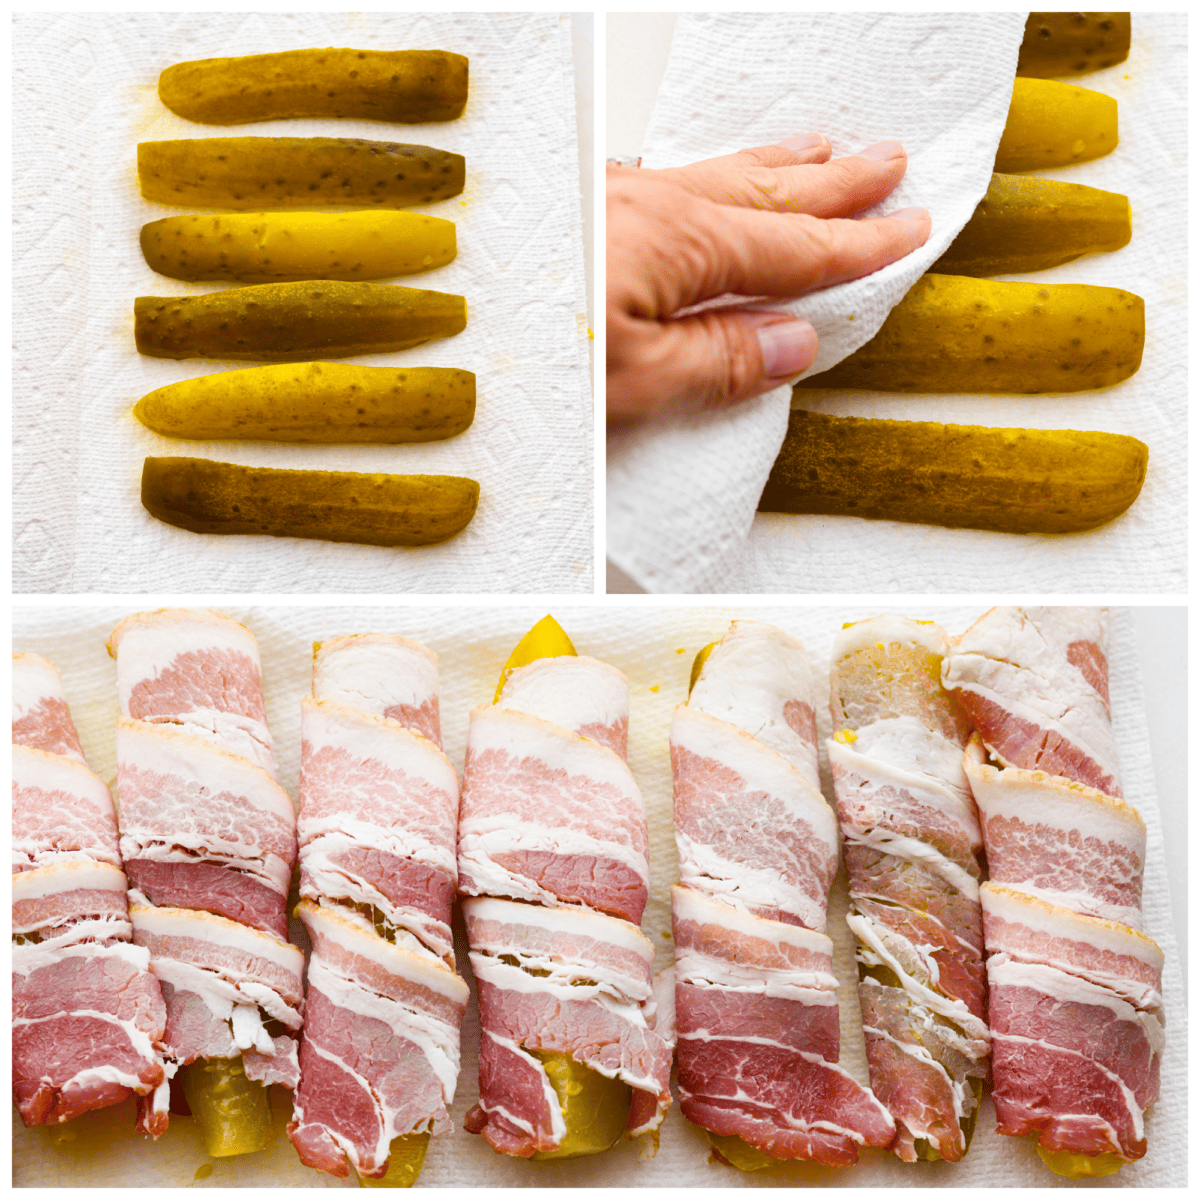 3-photo collage of the pickles being pat dry and wrapped in bacon.